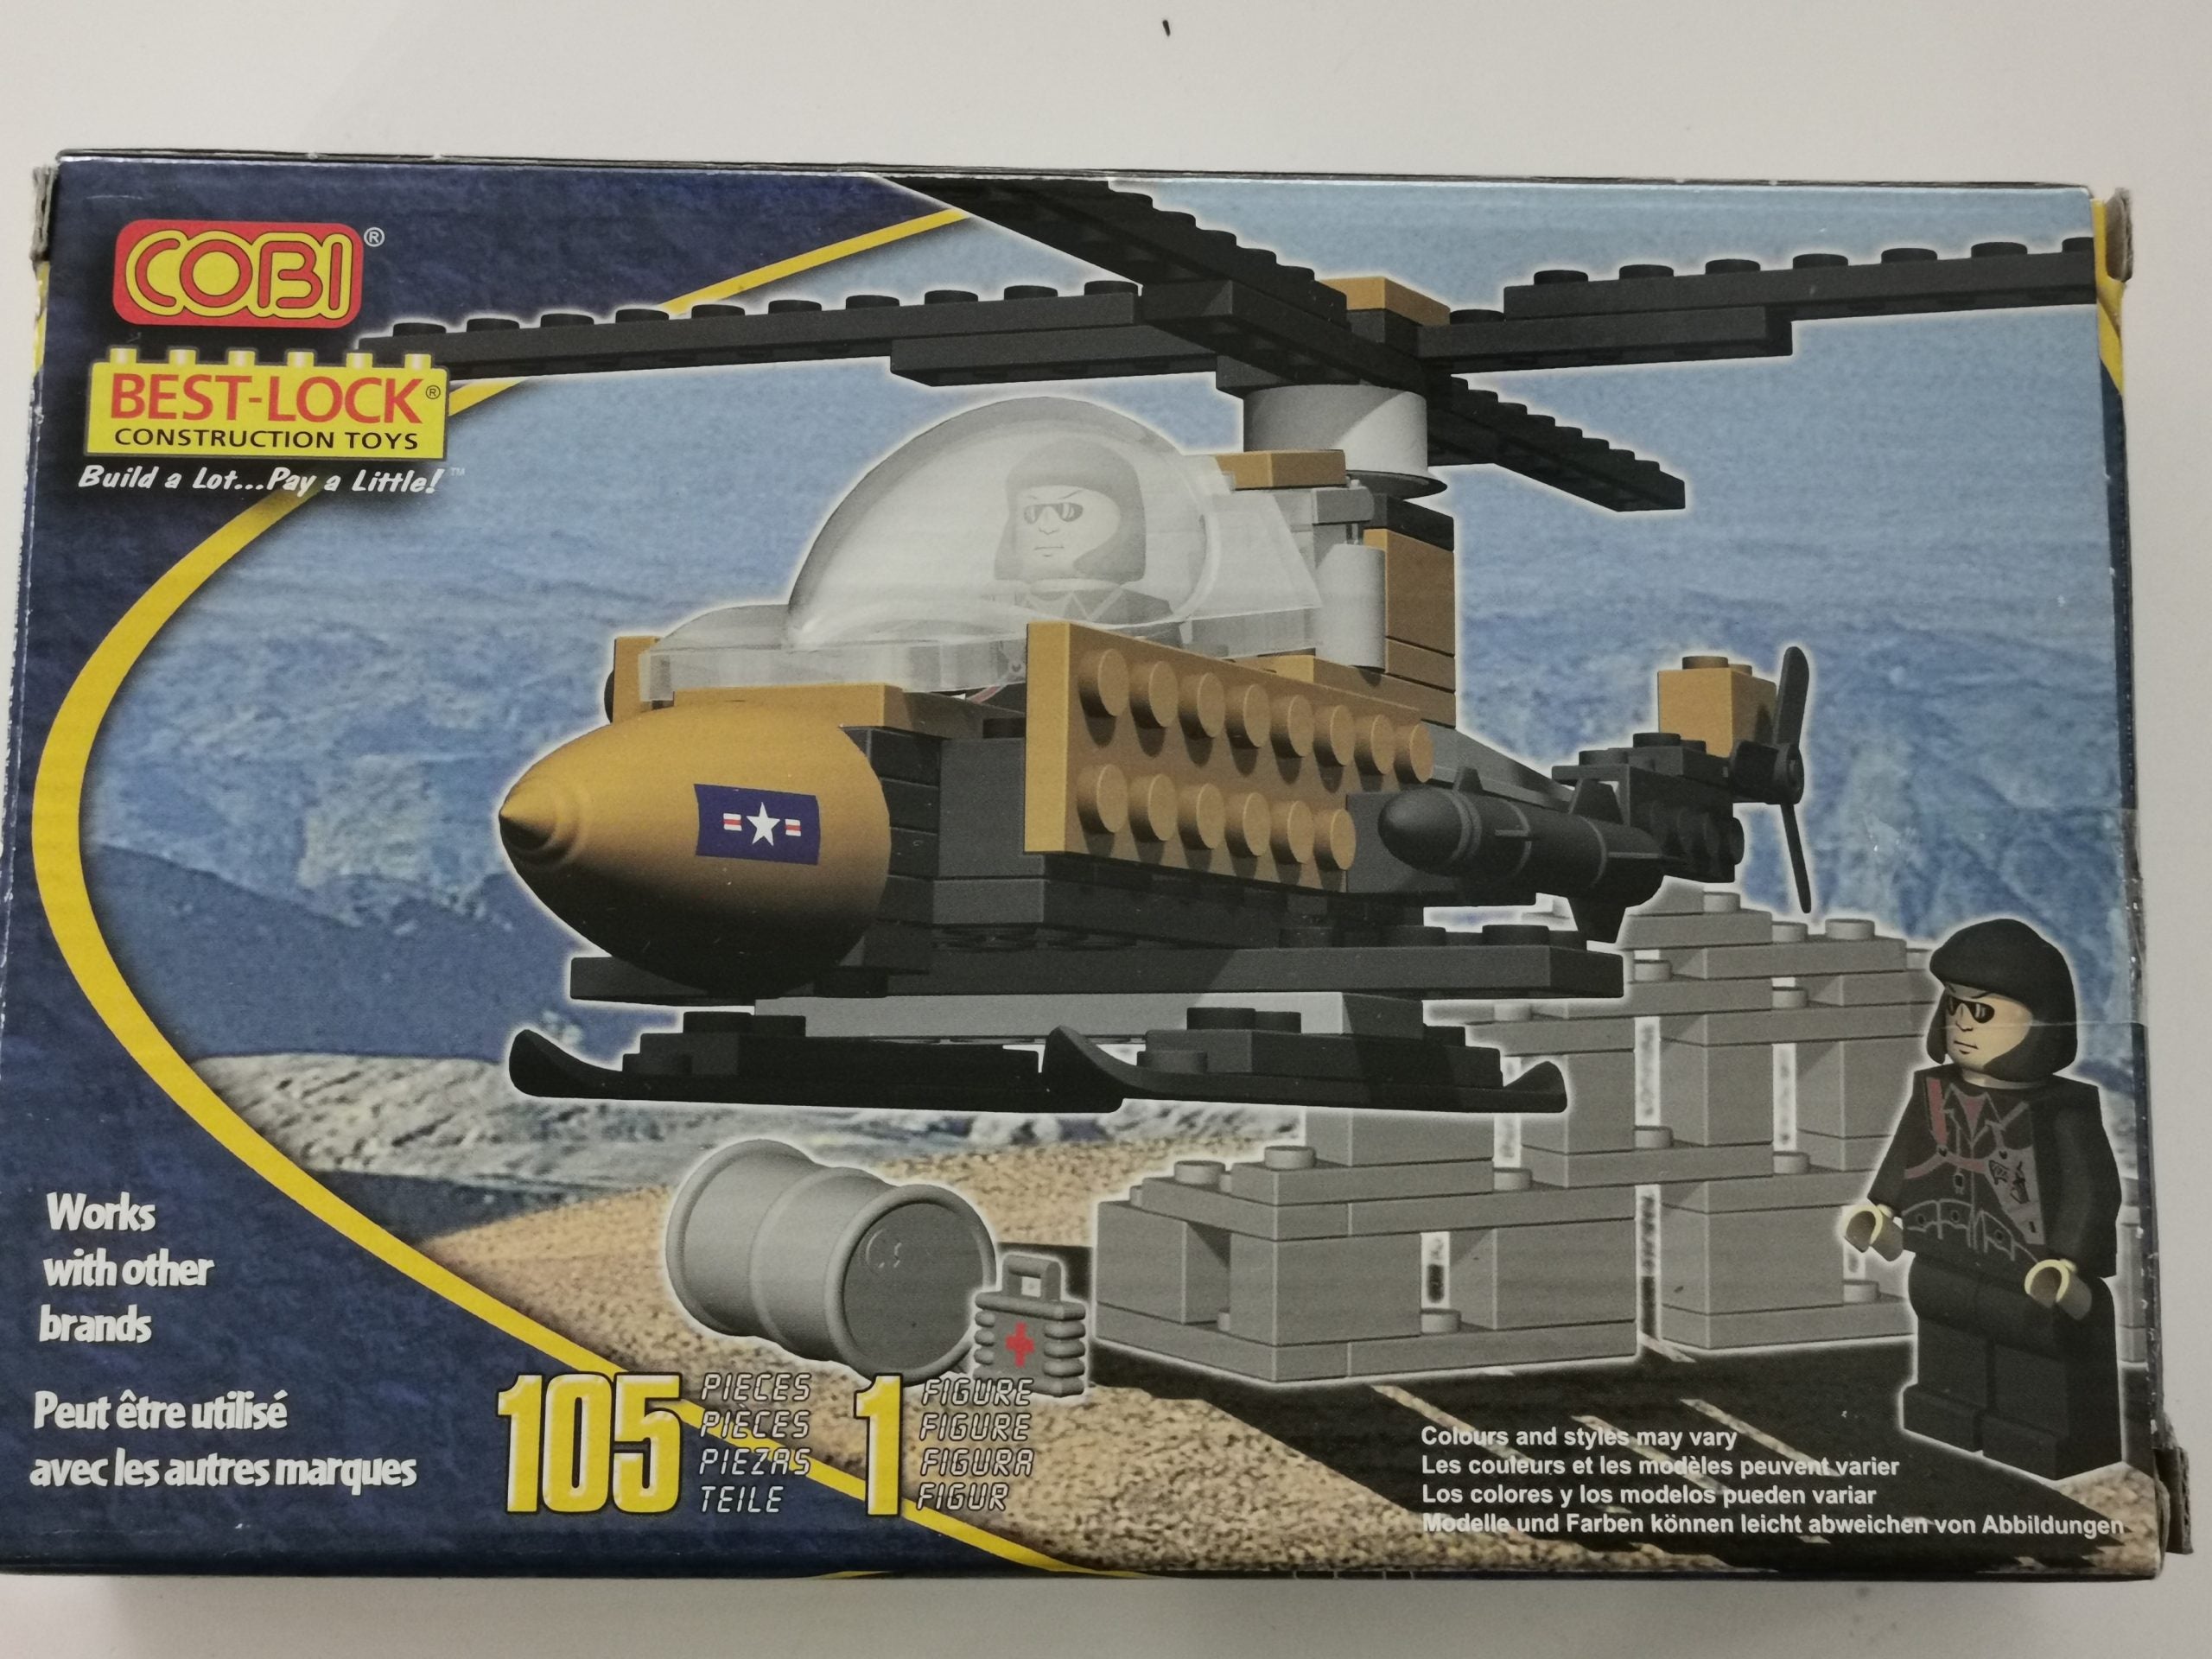 Cobi 3359 Helicopter used